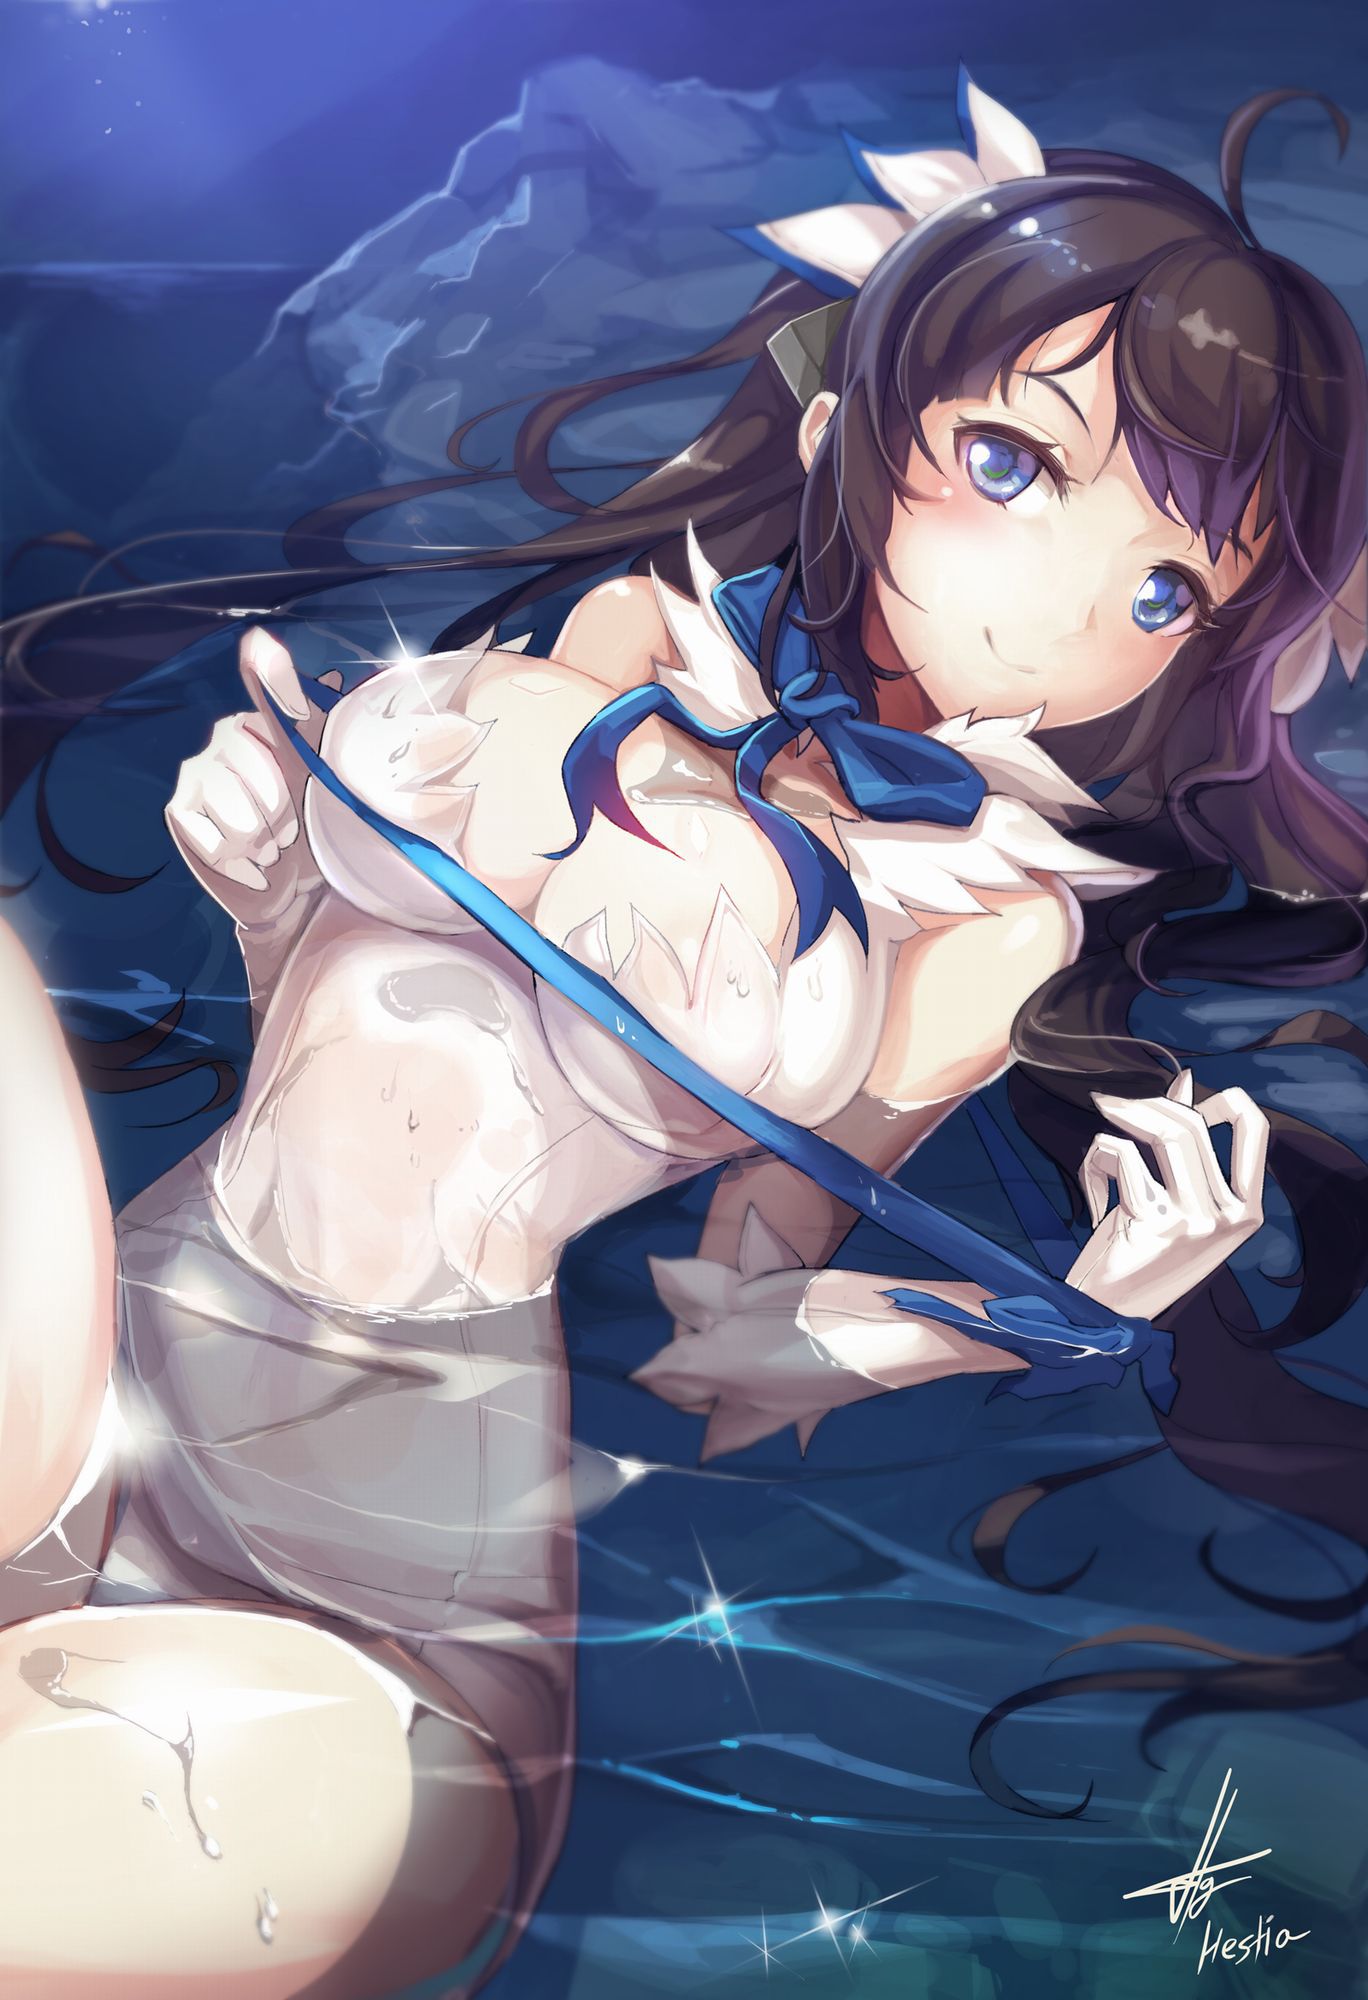 [Secondary erotic] erotic image of girls who are wet with water and clothes are in a state of skeske is here 14